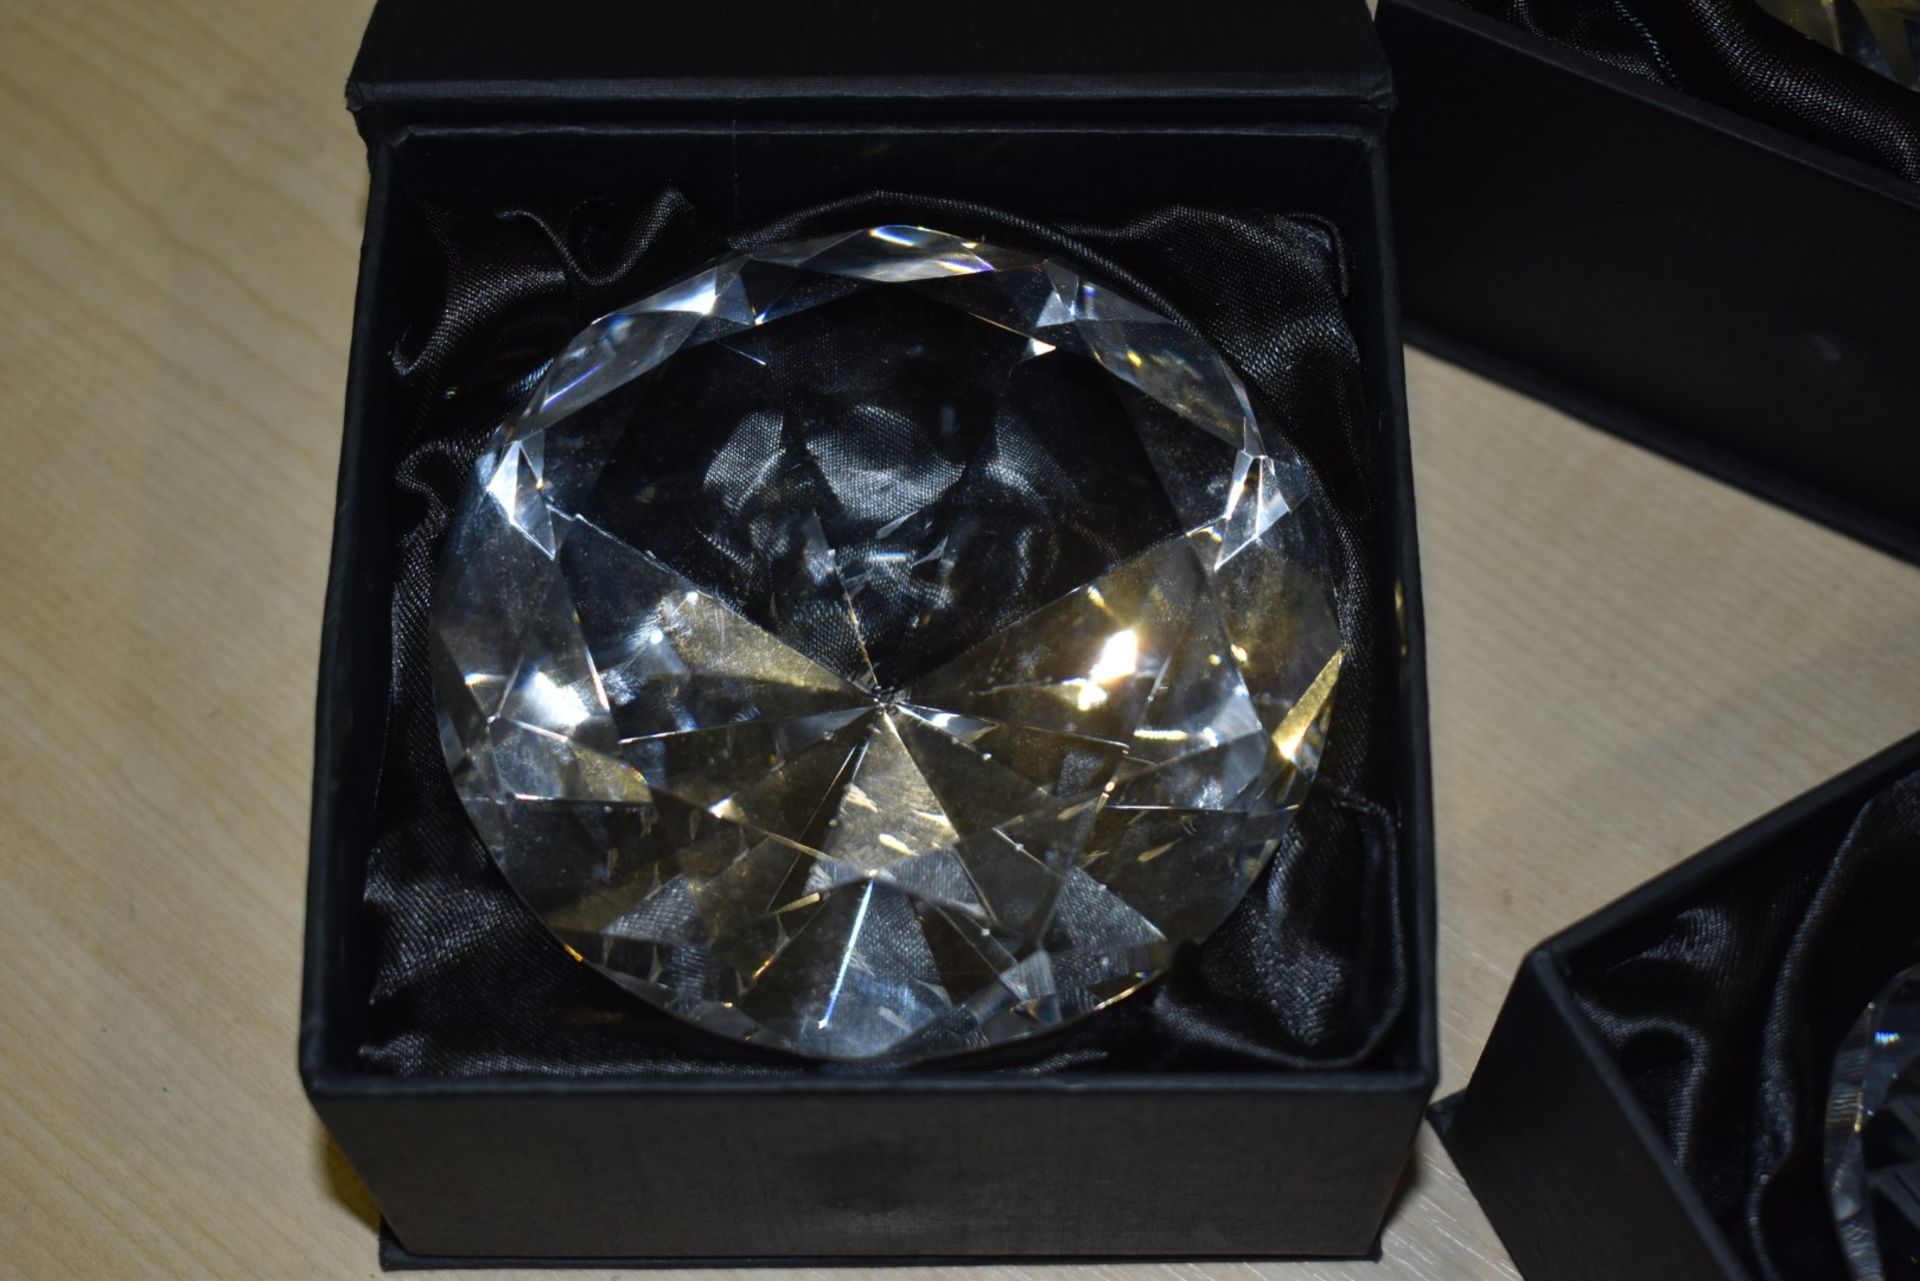 3 x Ice London Faux Diamond Paperweights - New and Boxed - Ref: In2128 wh1 pal1 - CL011 - - Image 7 of 8